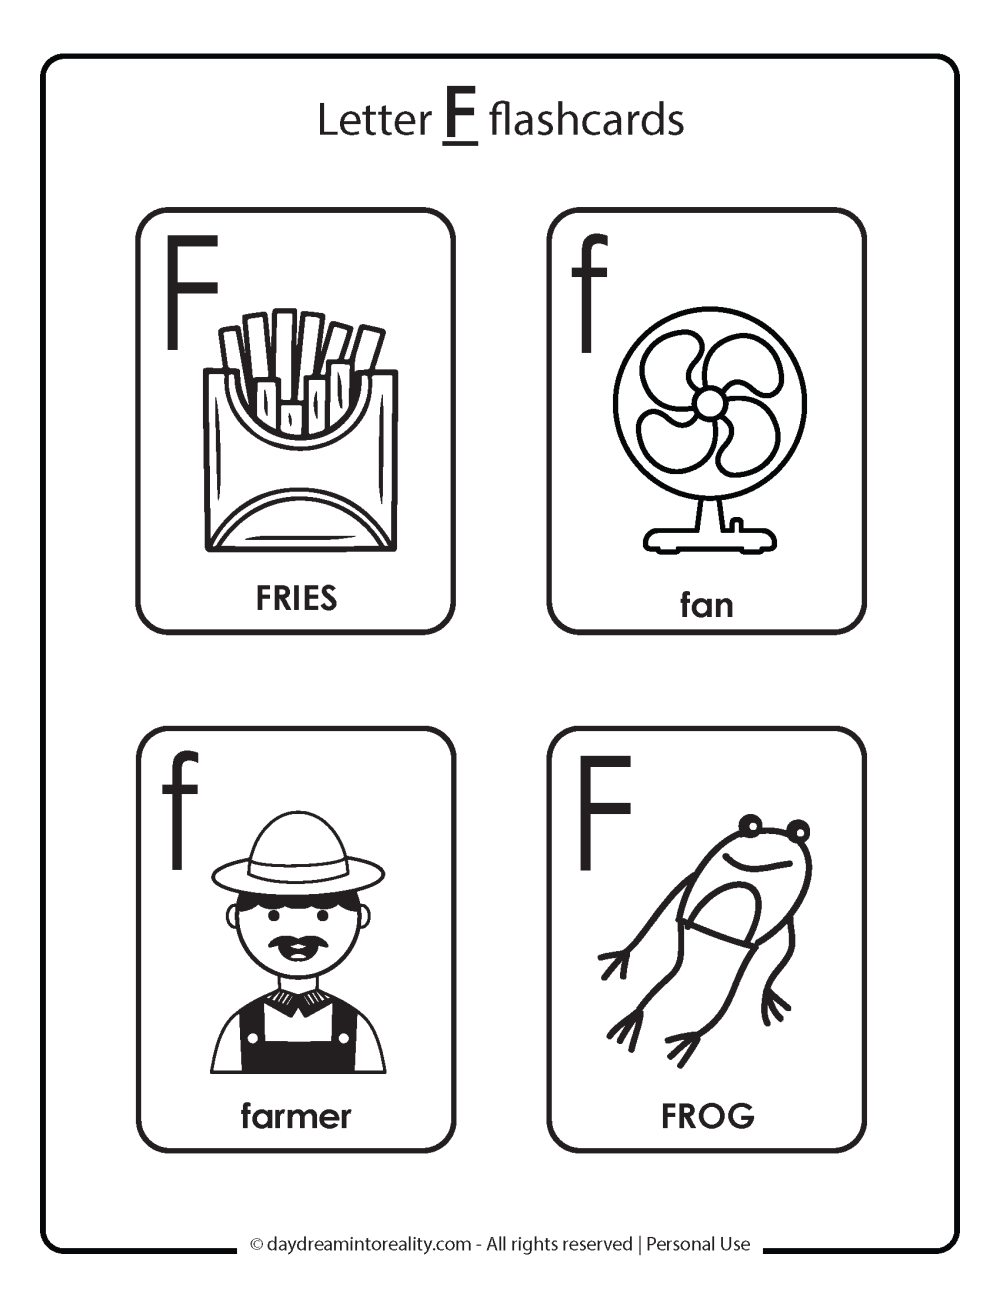 Letter F flashcards Free Printable